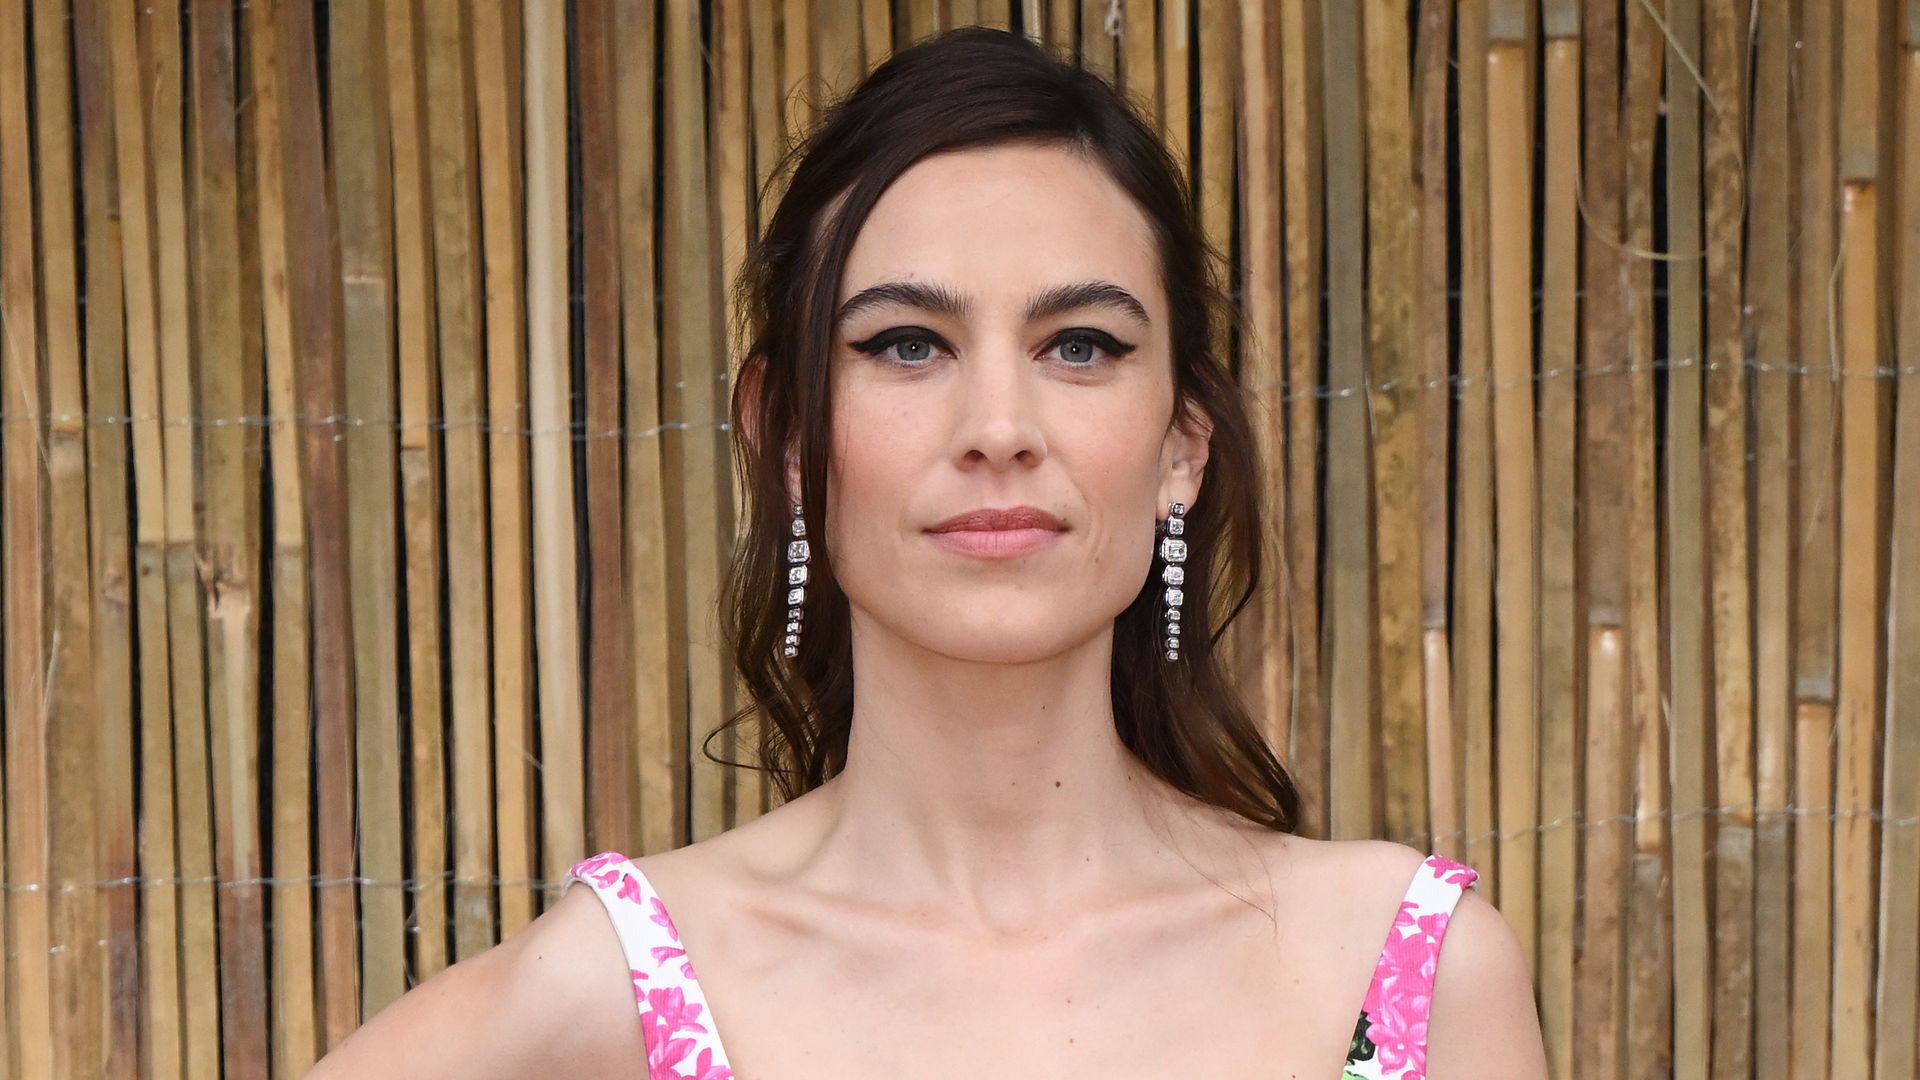 Alexa Chung sports a floral mini dress at The Serpentine Gallery Summer Party